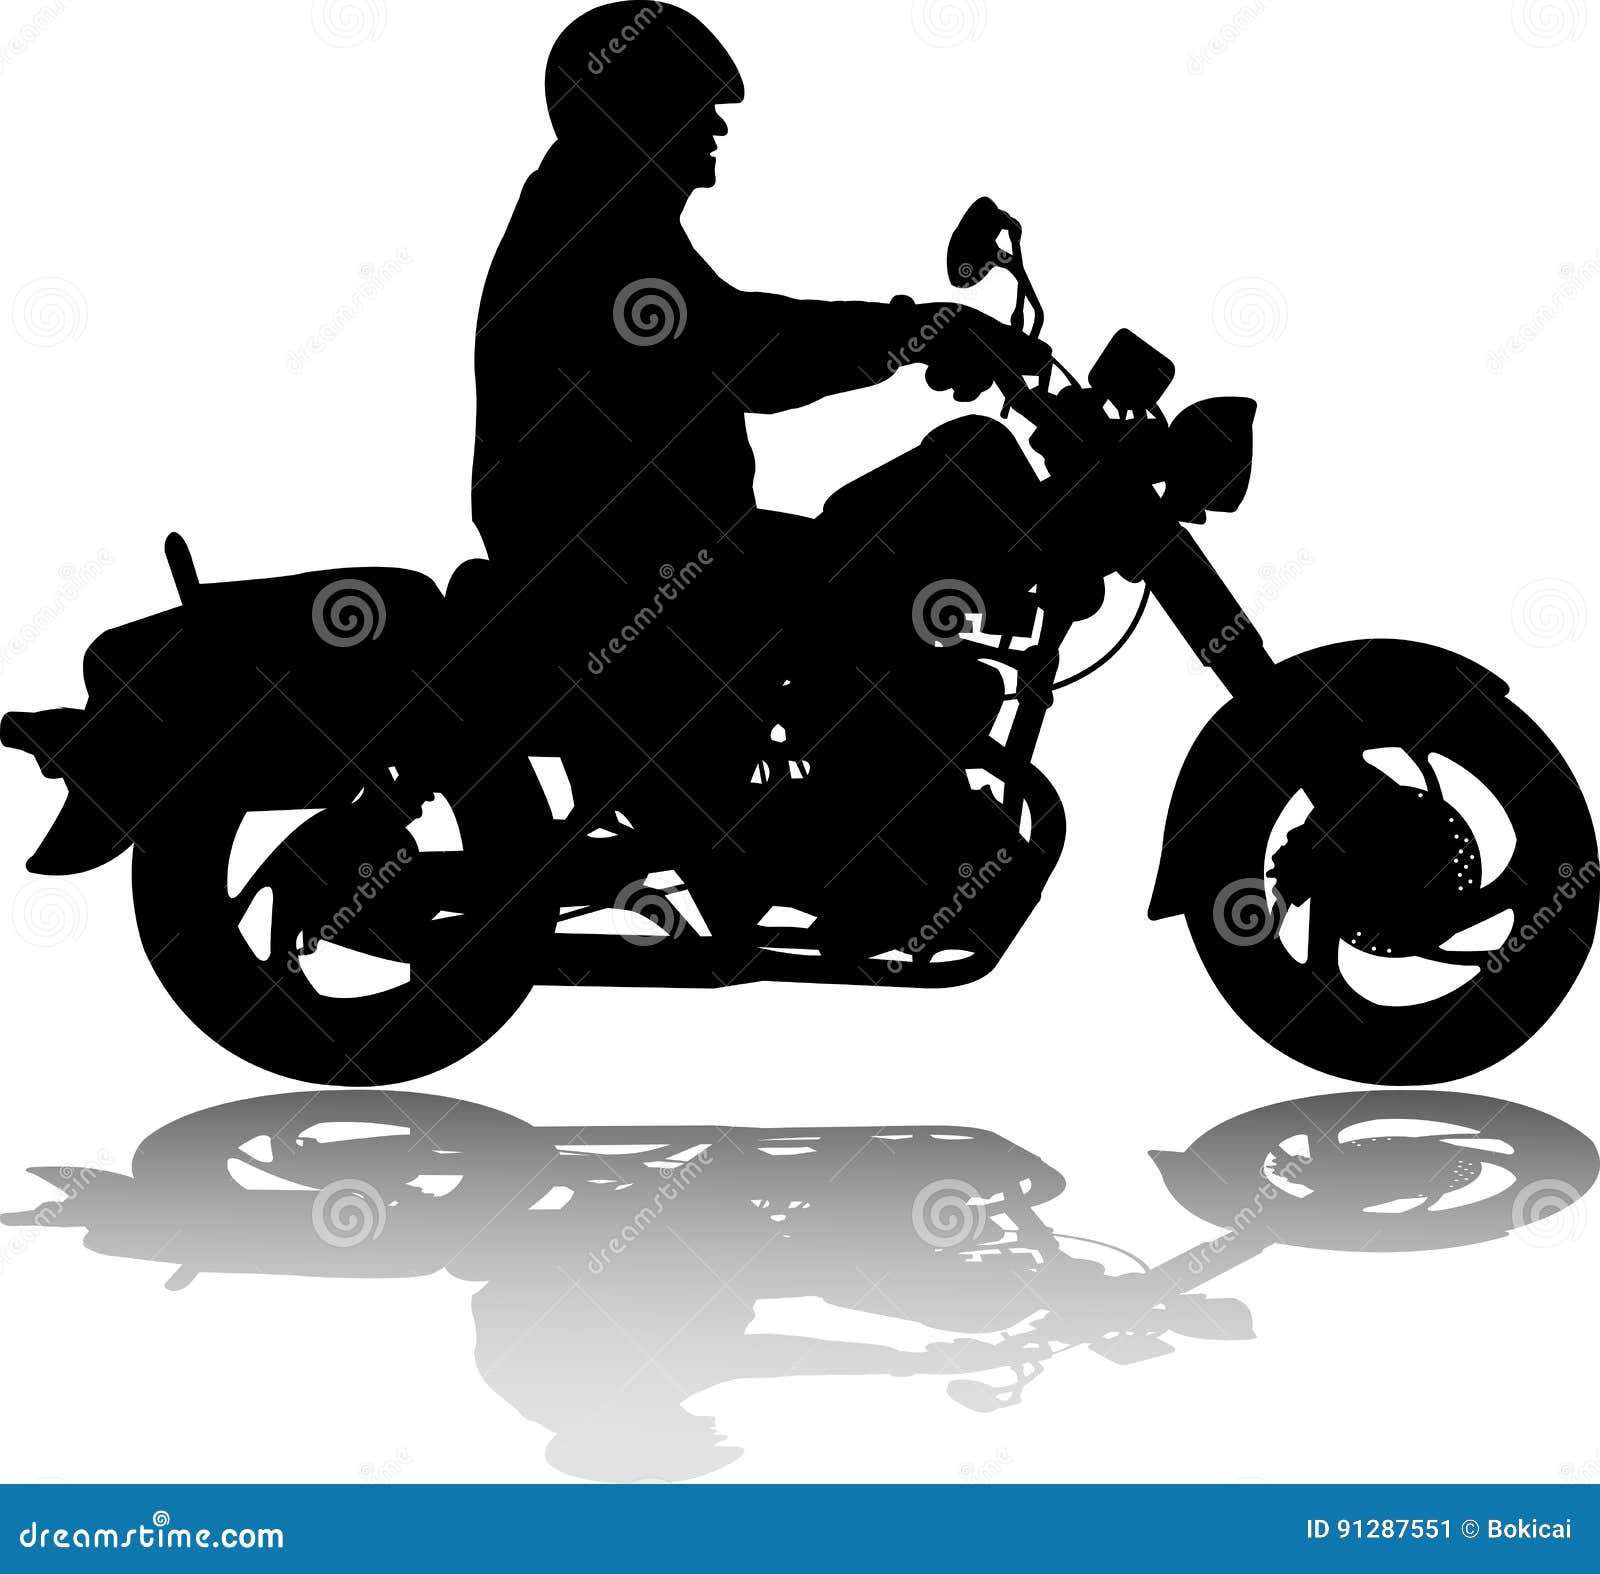 Motorcycle Silhouette Logo Vector Illustration